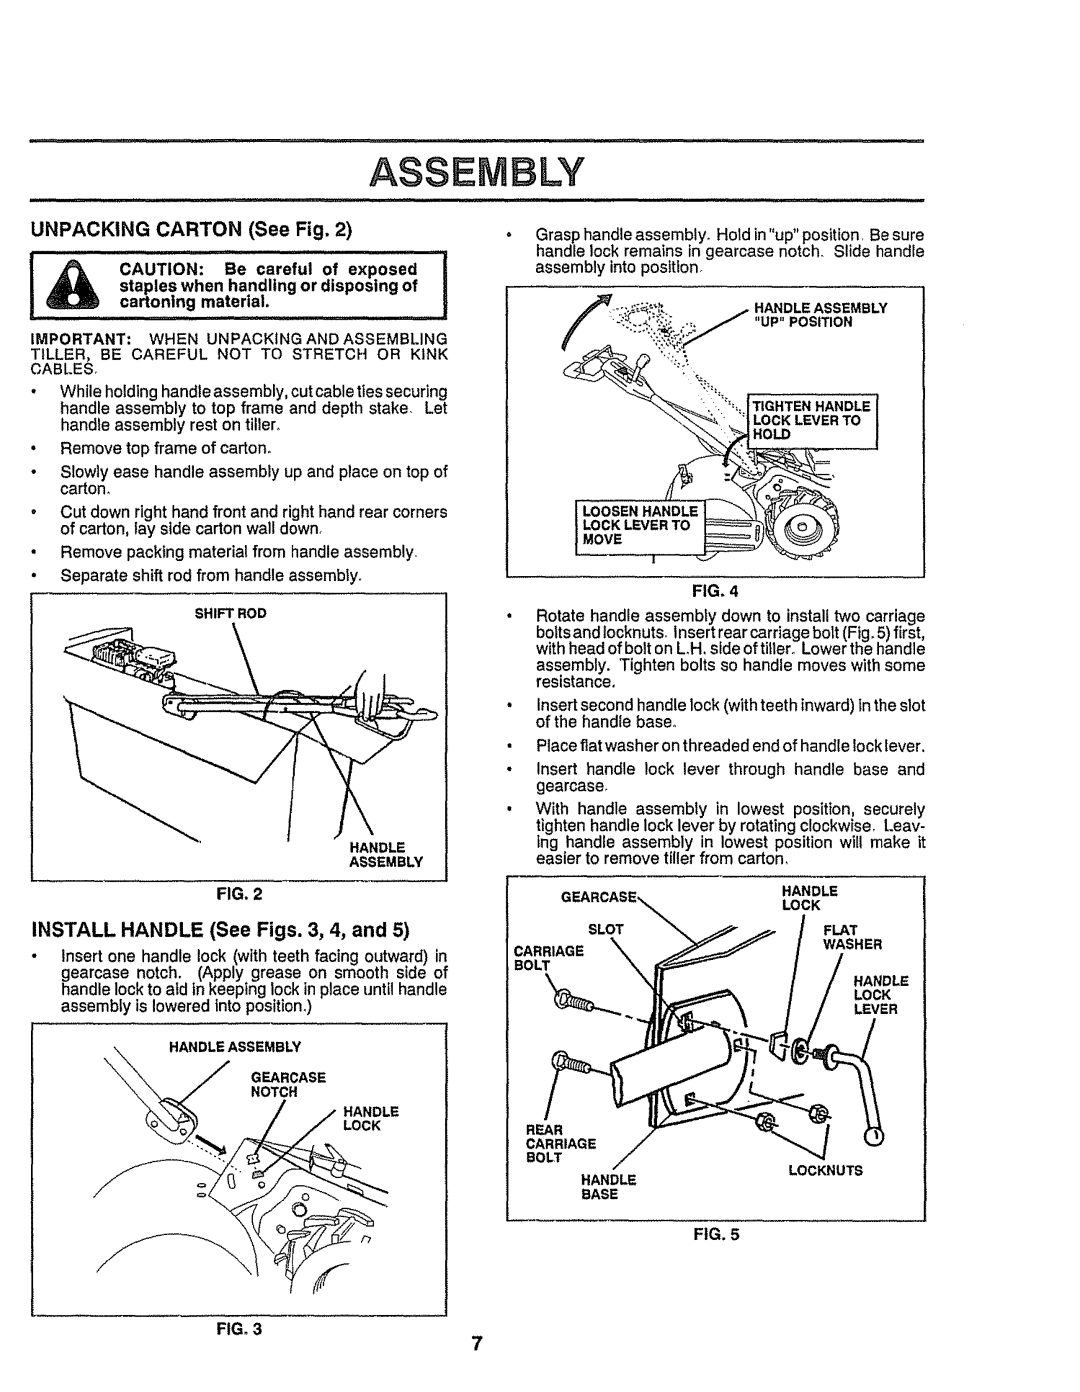 Craftsman 917-299751 Assembly, UNPACKING CARTON See Fig, INSTALL HANDLE See Figs. 3, 4, and, u..OSITiON, Handle 